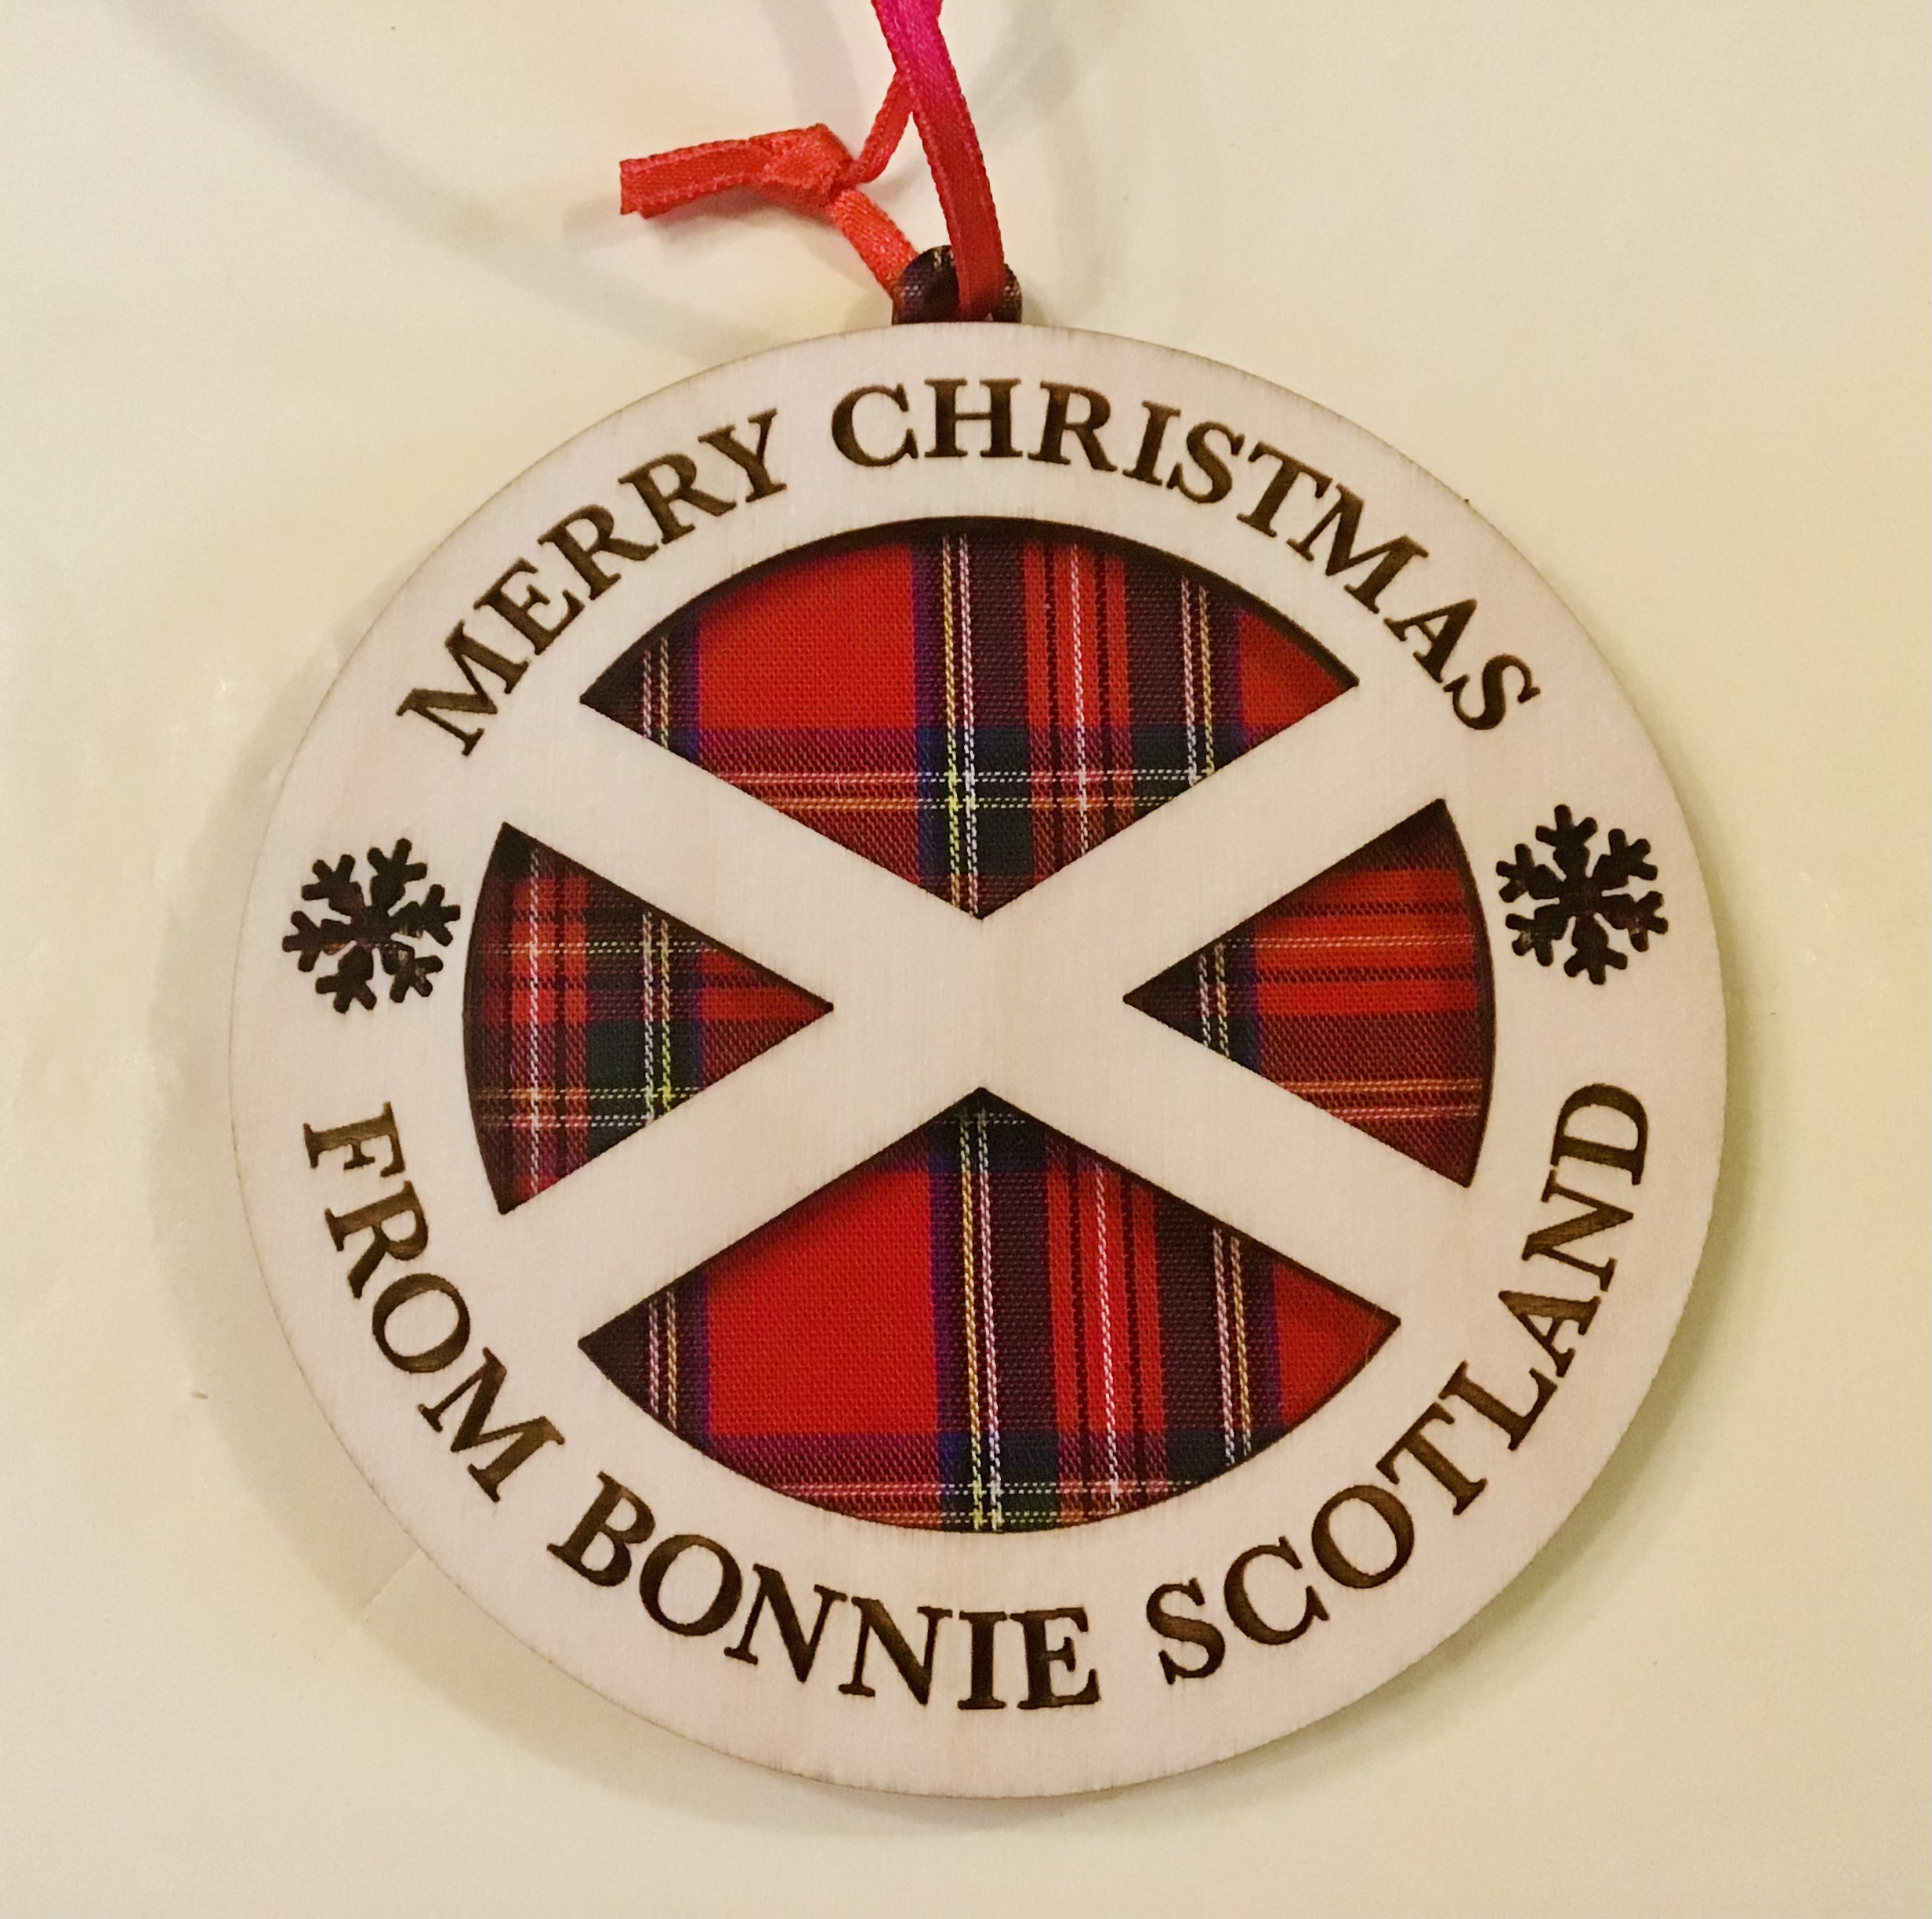 Roundal “Merry Christmas from Bonnie Scotland' 